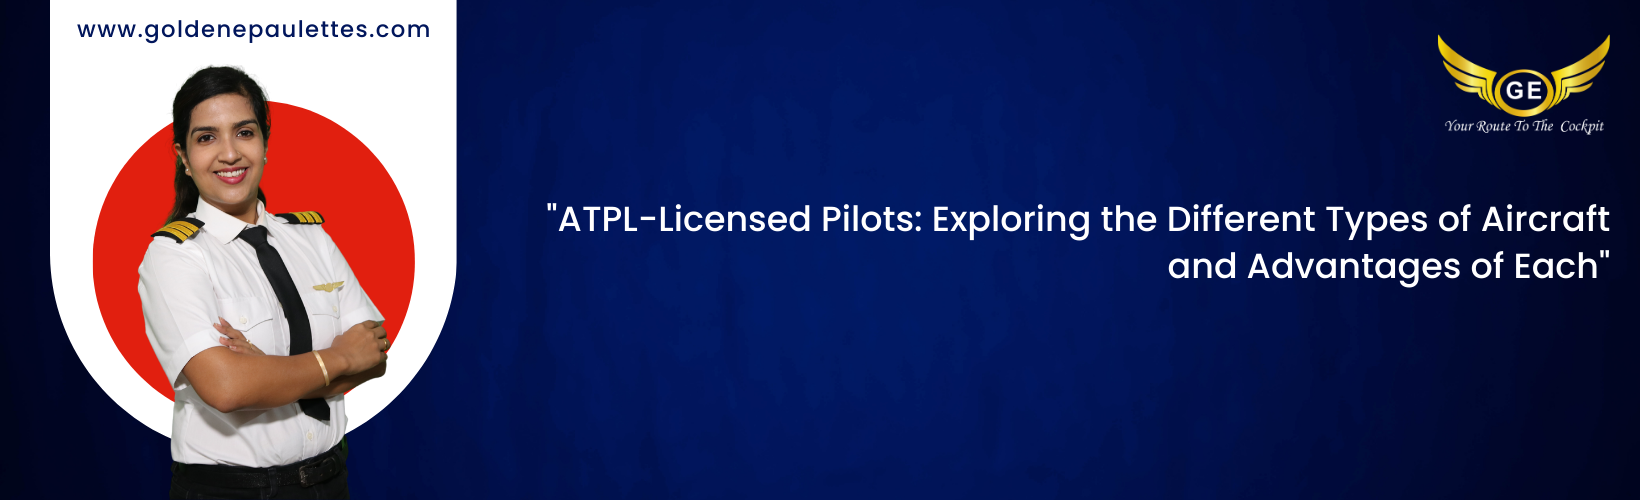 The Challenges of Being an ATPL-Licensed Pilot